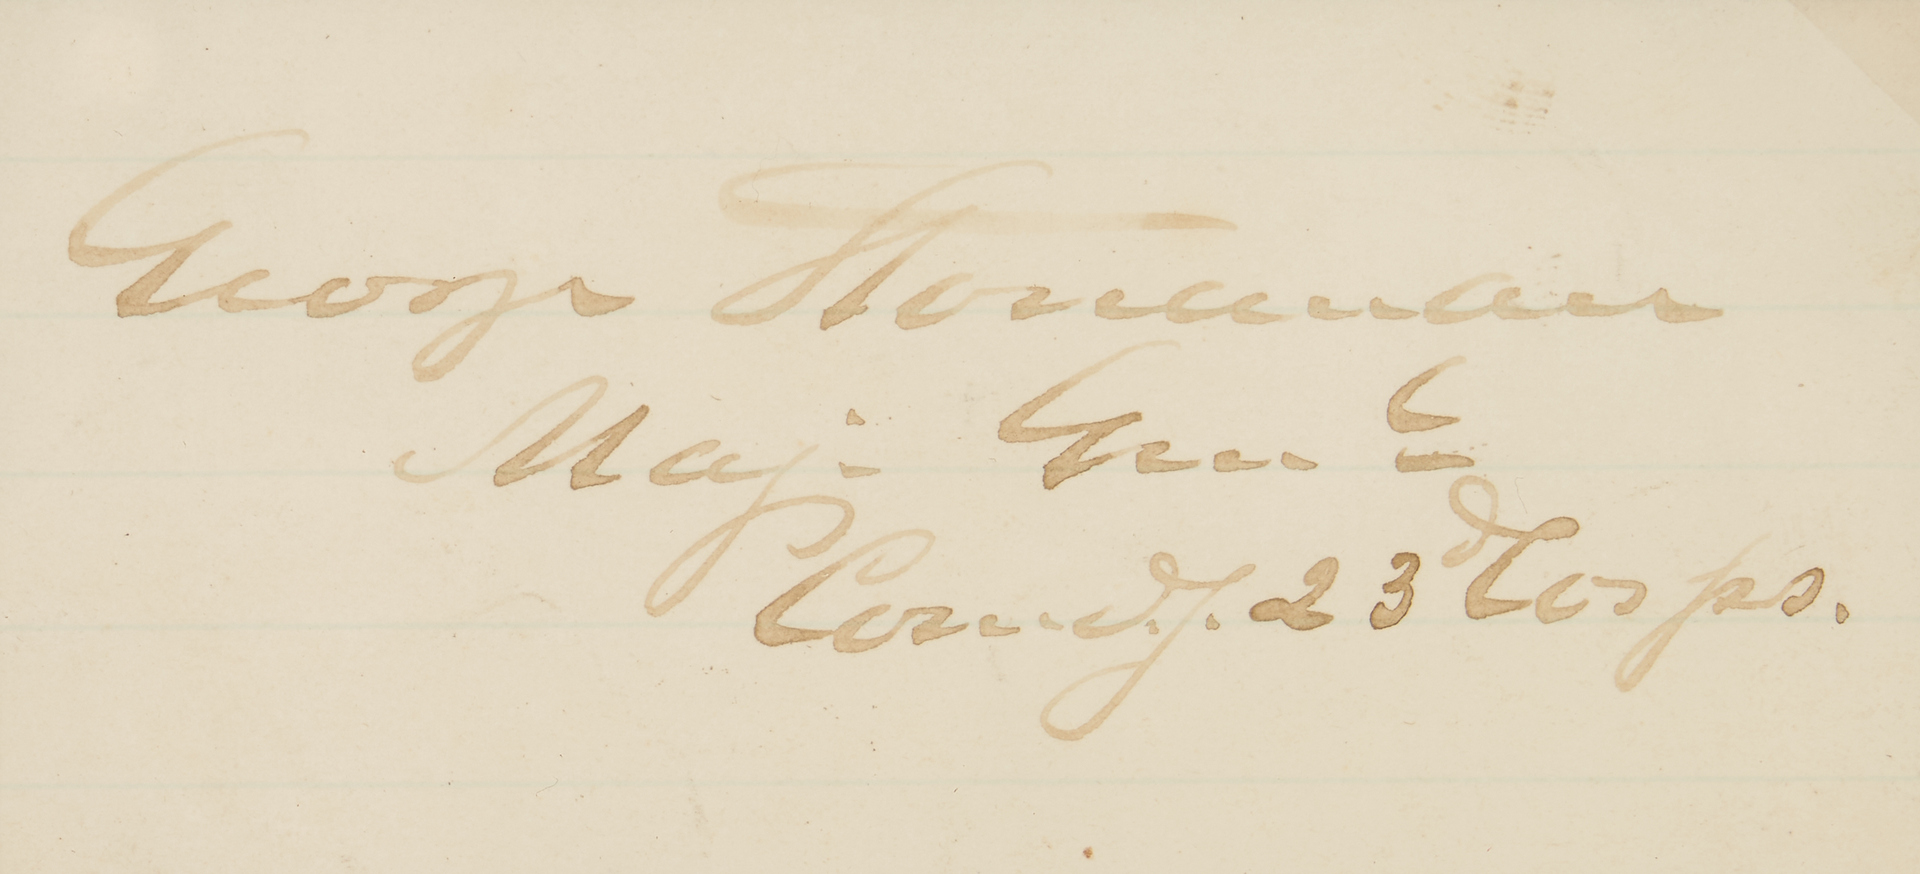 Lot 756: Civil War Related Archive, incl. Sheriden ALS